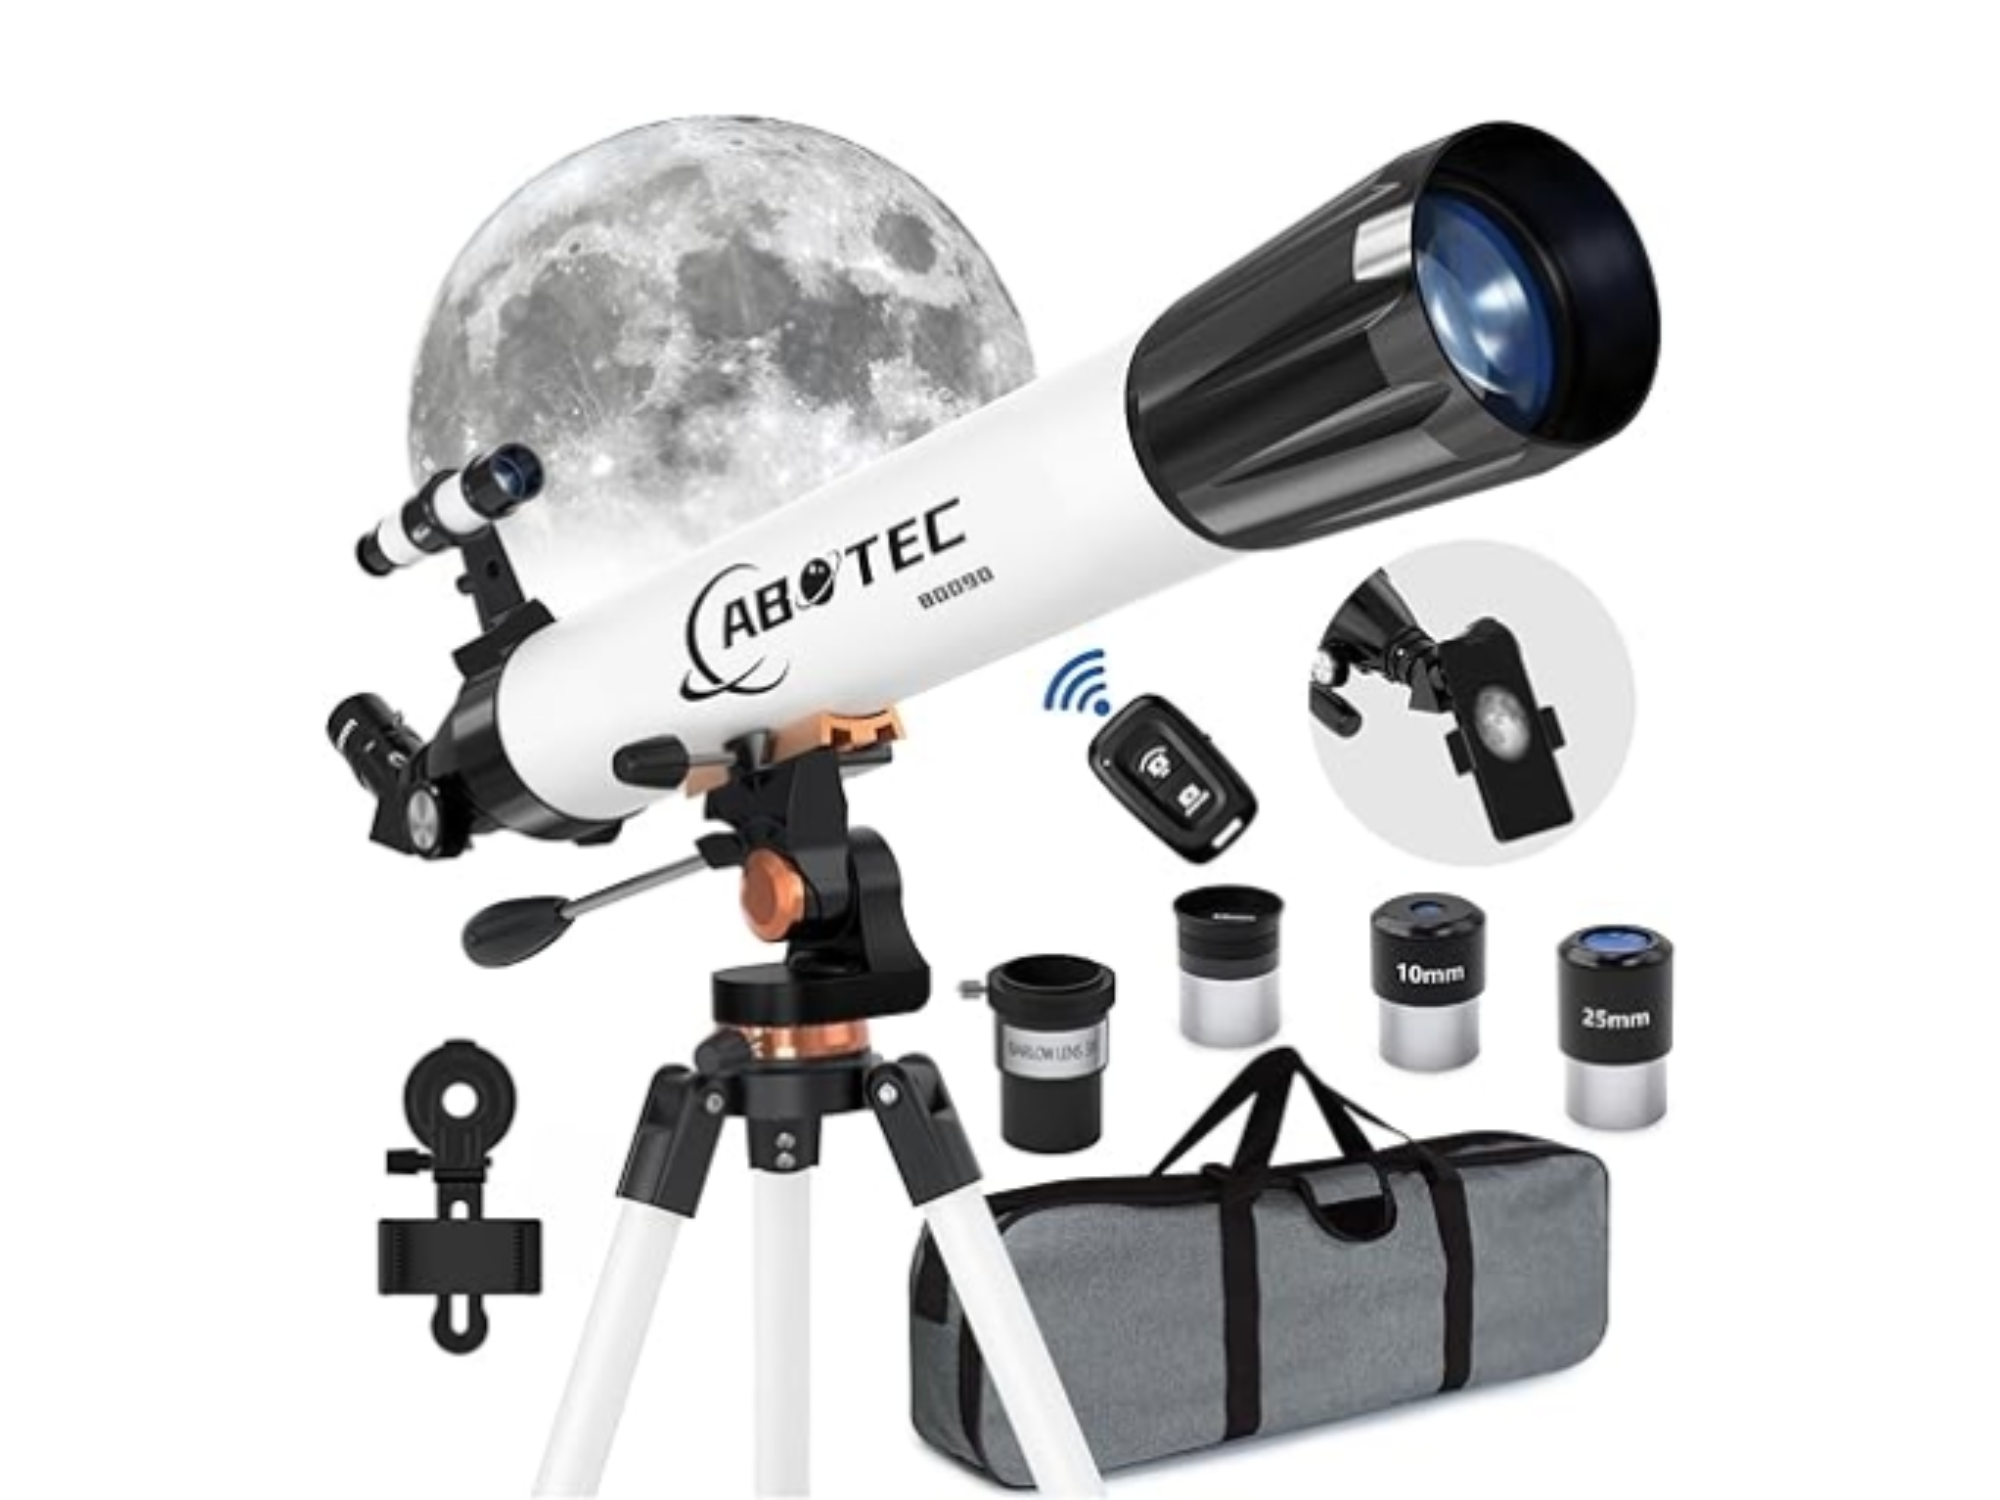 Discover the cosmos with this telescope for 40% discount